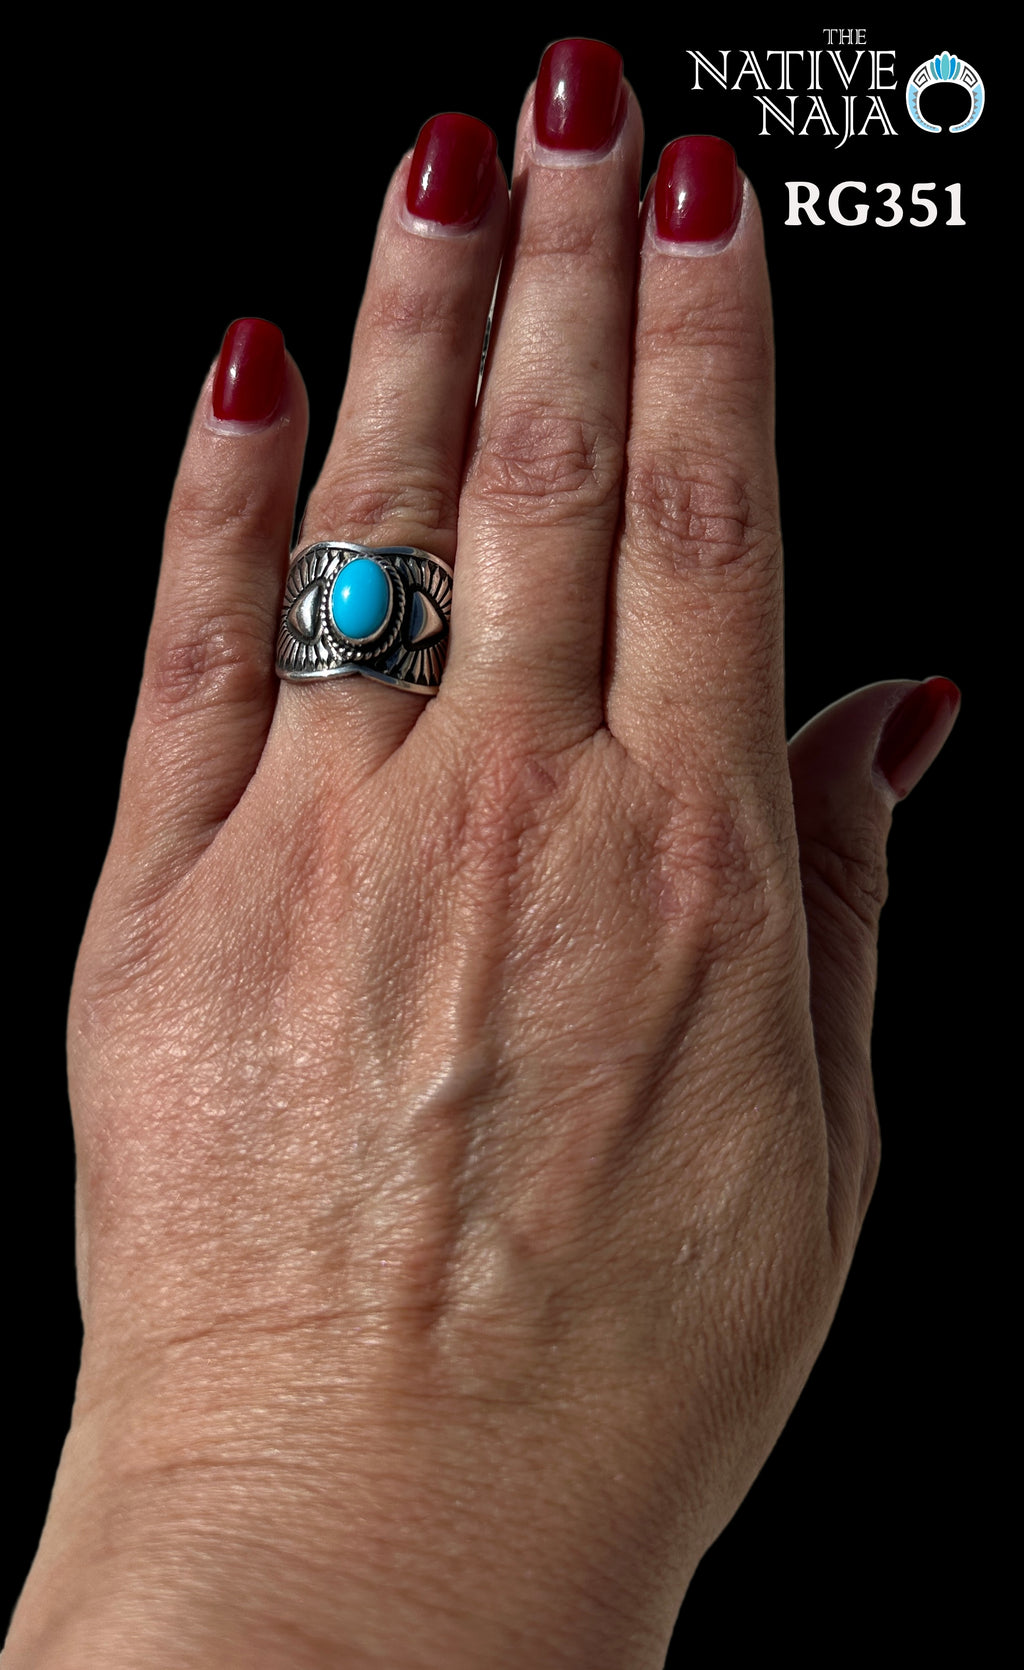 Navajo Artist Derrick Gordon Hand Stamped Sterling Silver & Sleeping Beauty Turquoise Wide Band Ring SZ 8 1/4 RG351